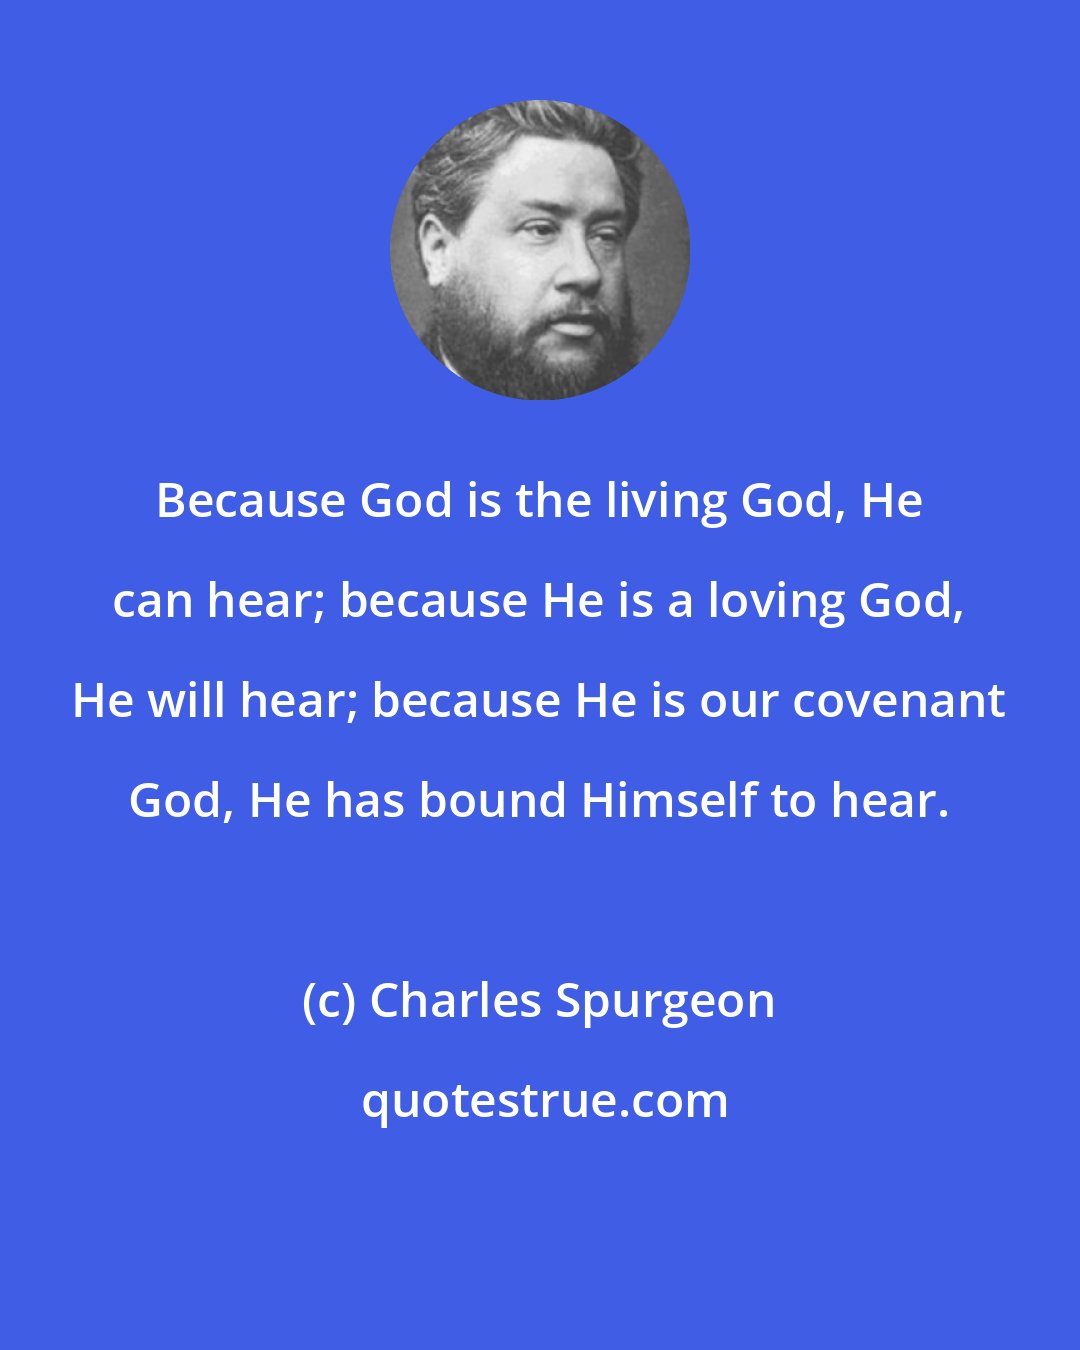 Charles Spurgeon: Because God is the living God, He can hear; because He is a loving God, He will hear; because He is our covenant God, He has bound Himself to hear.